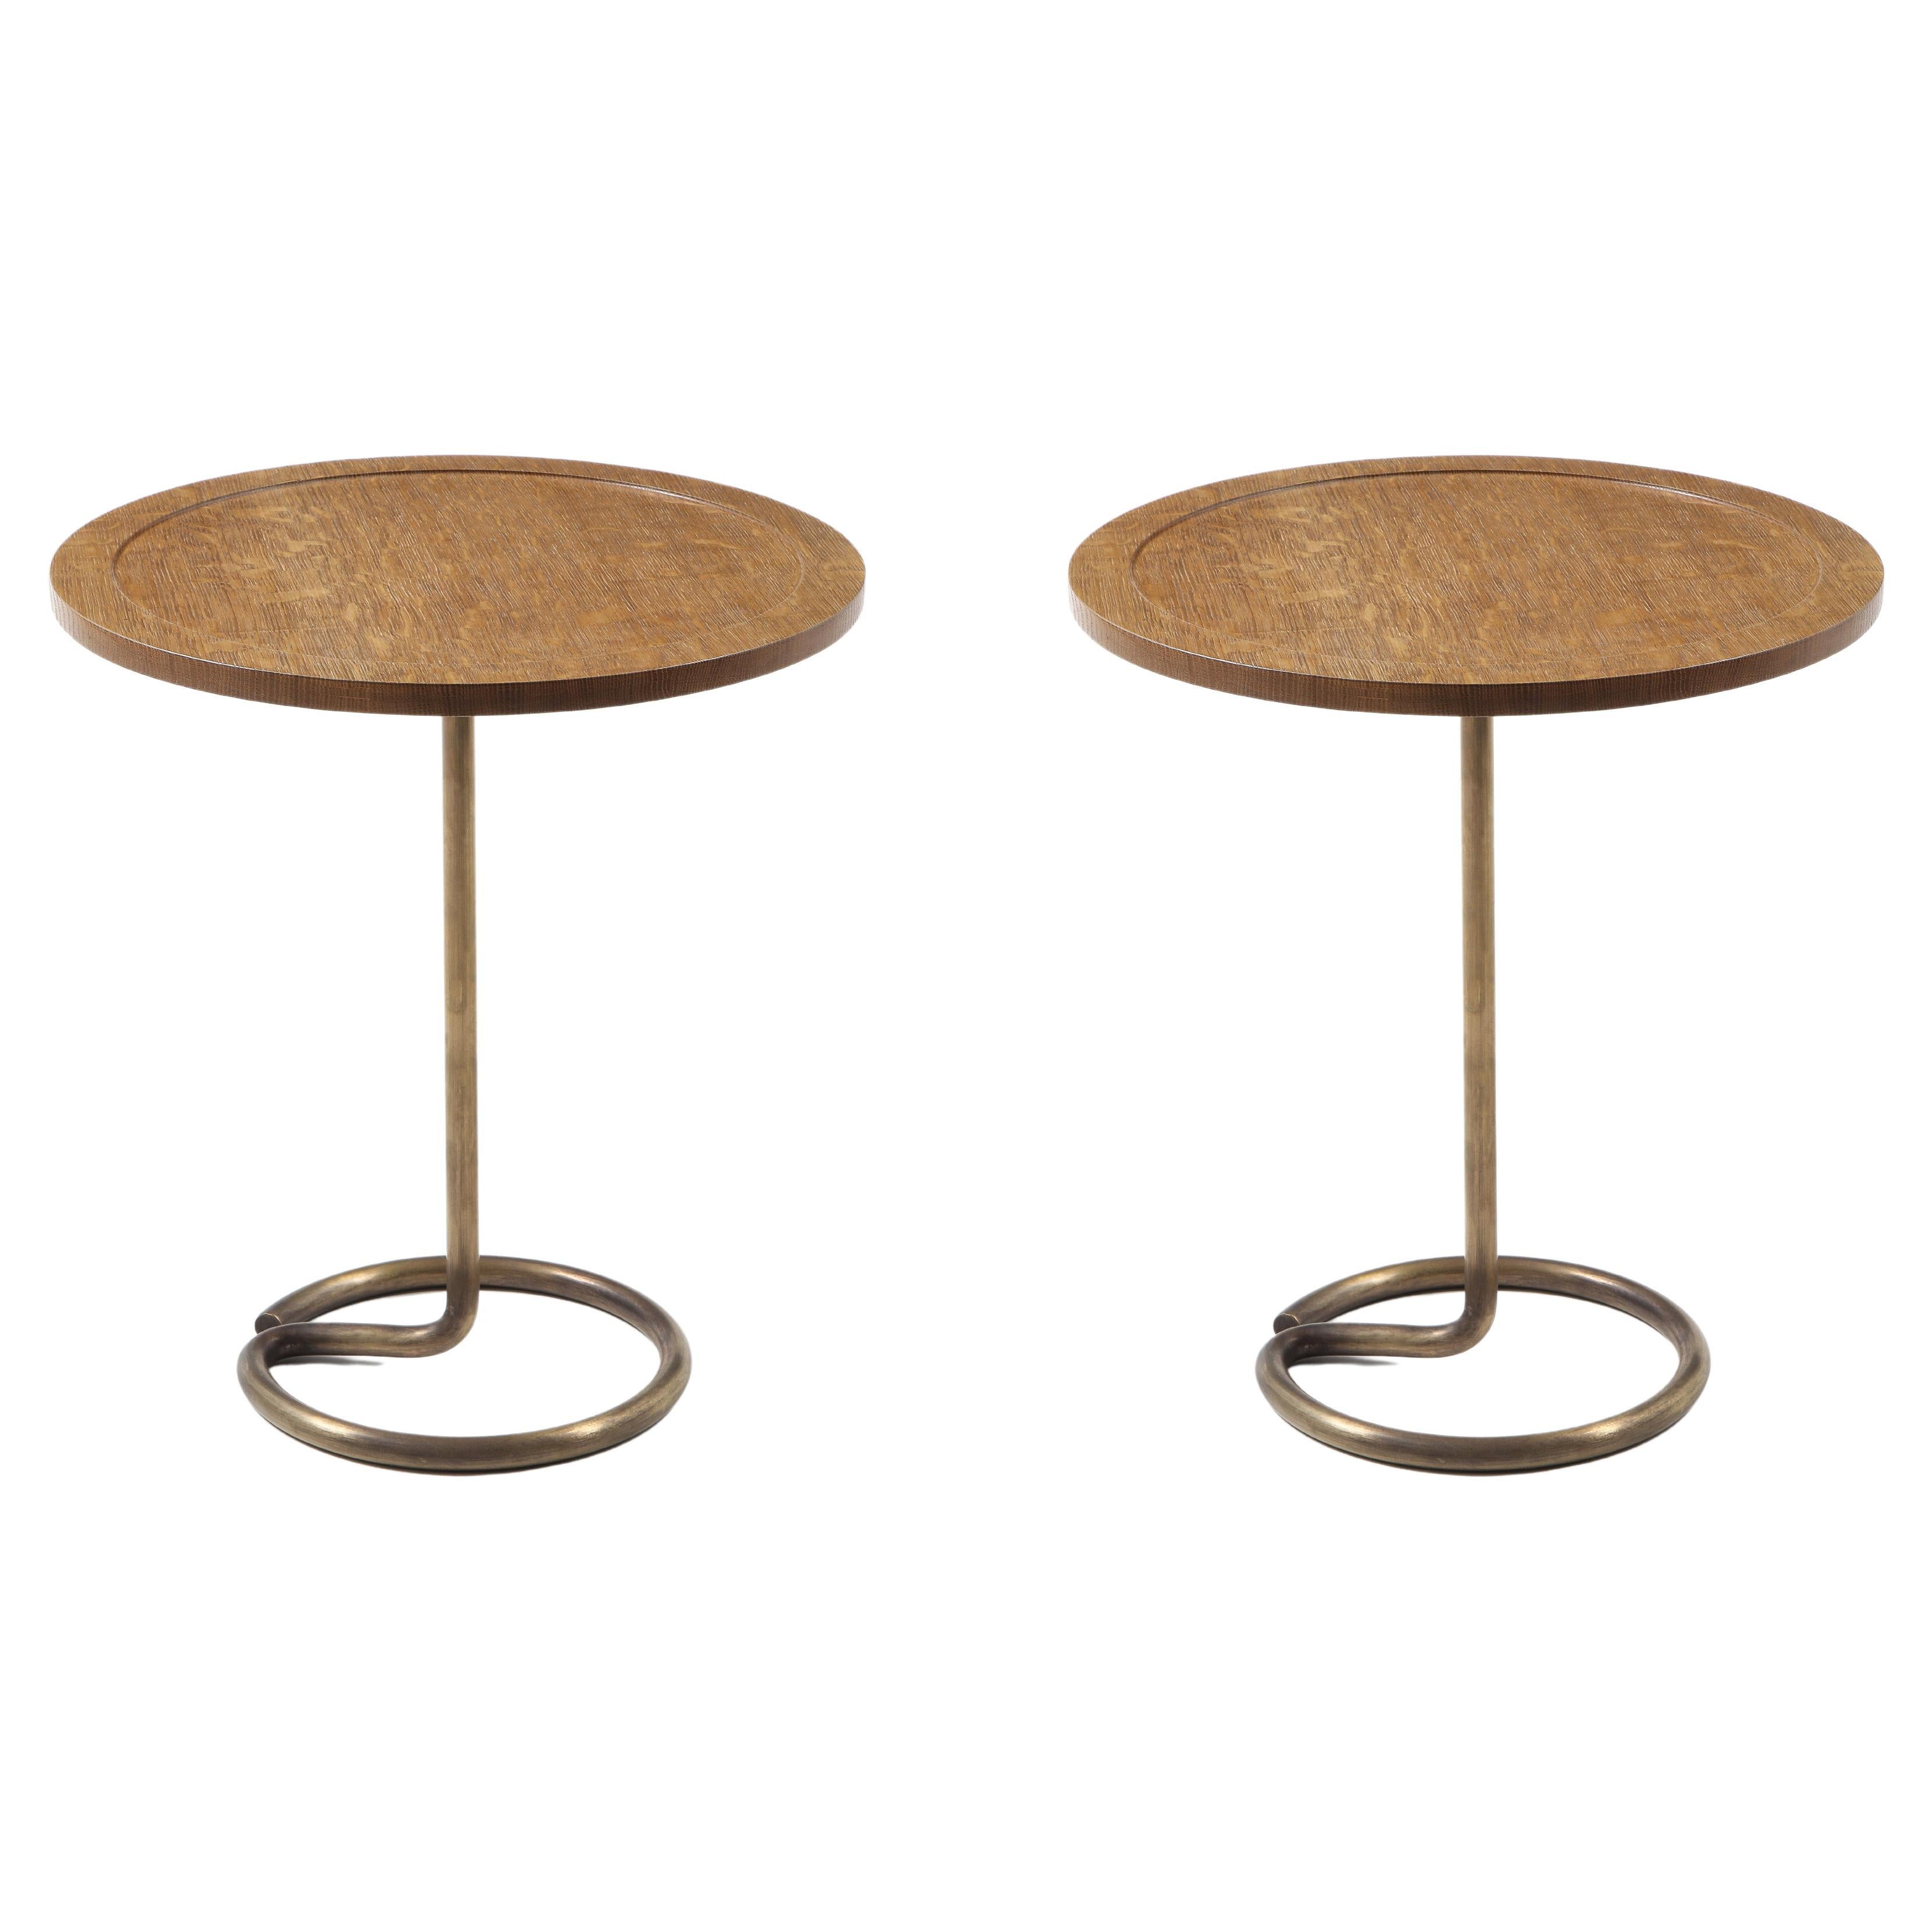 Herbst for Stablet Pair of Side Tables in Brass & Oak, France 1950's For Sale